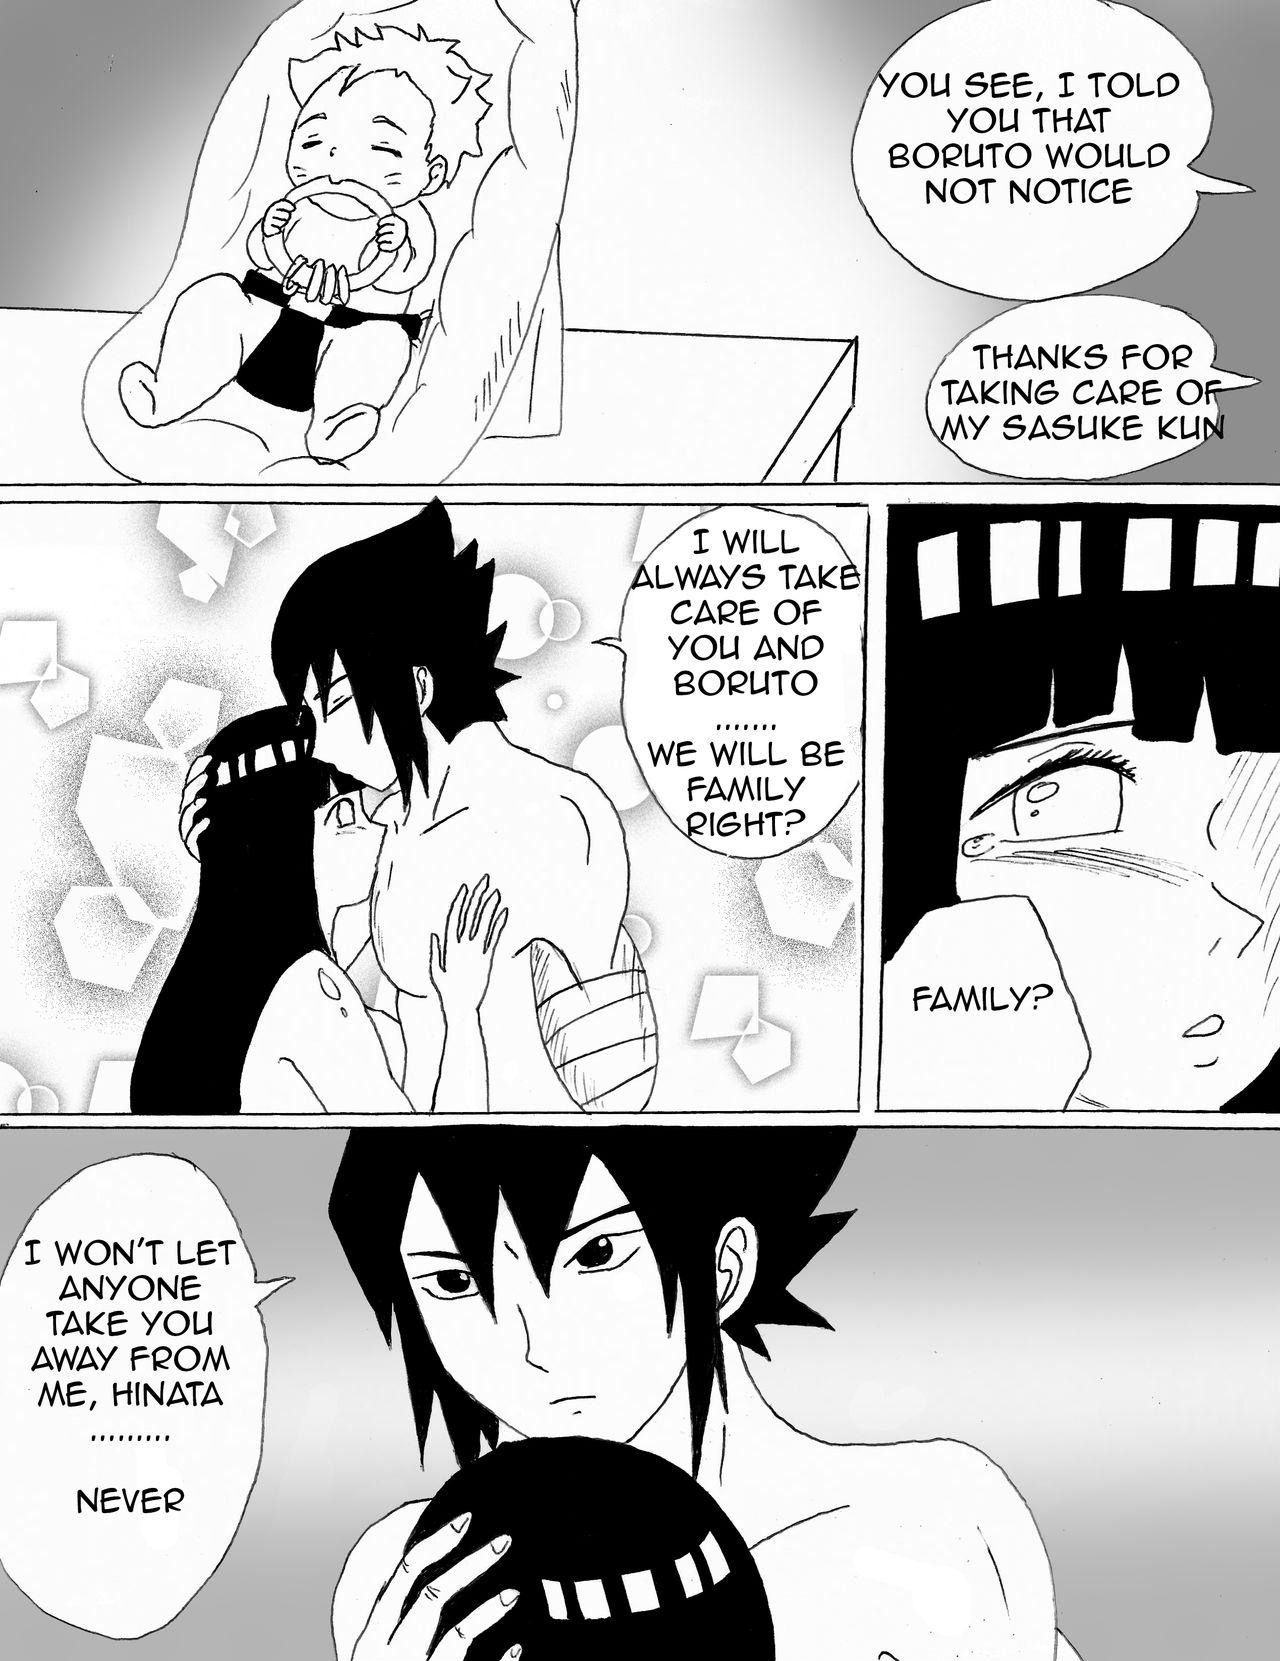 Chacal A life without you, The hidden - Naruto Petite Porn - Page 32